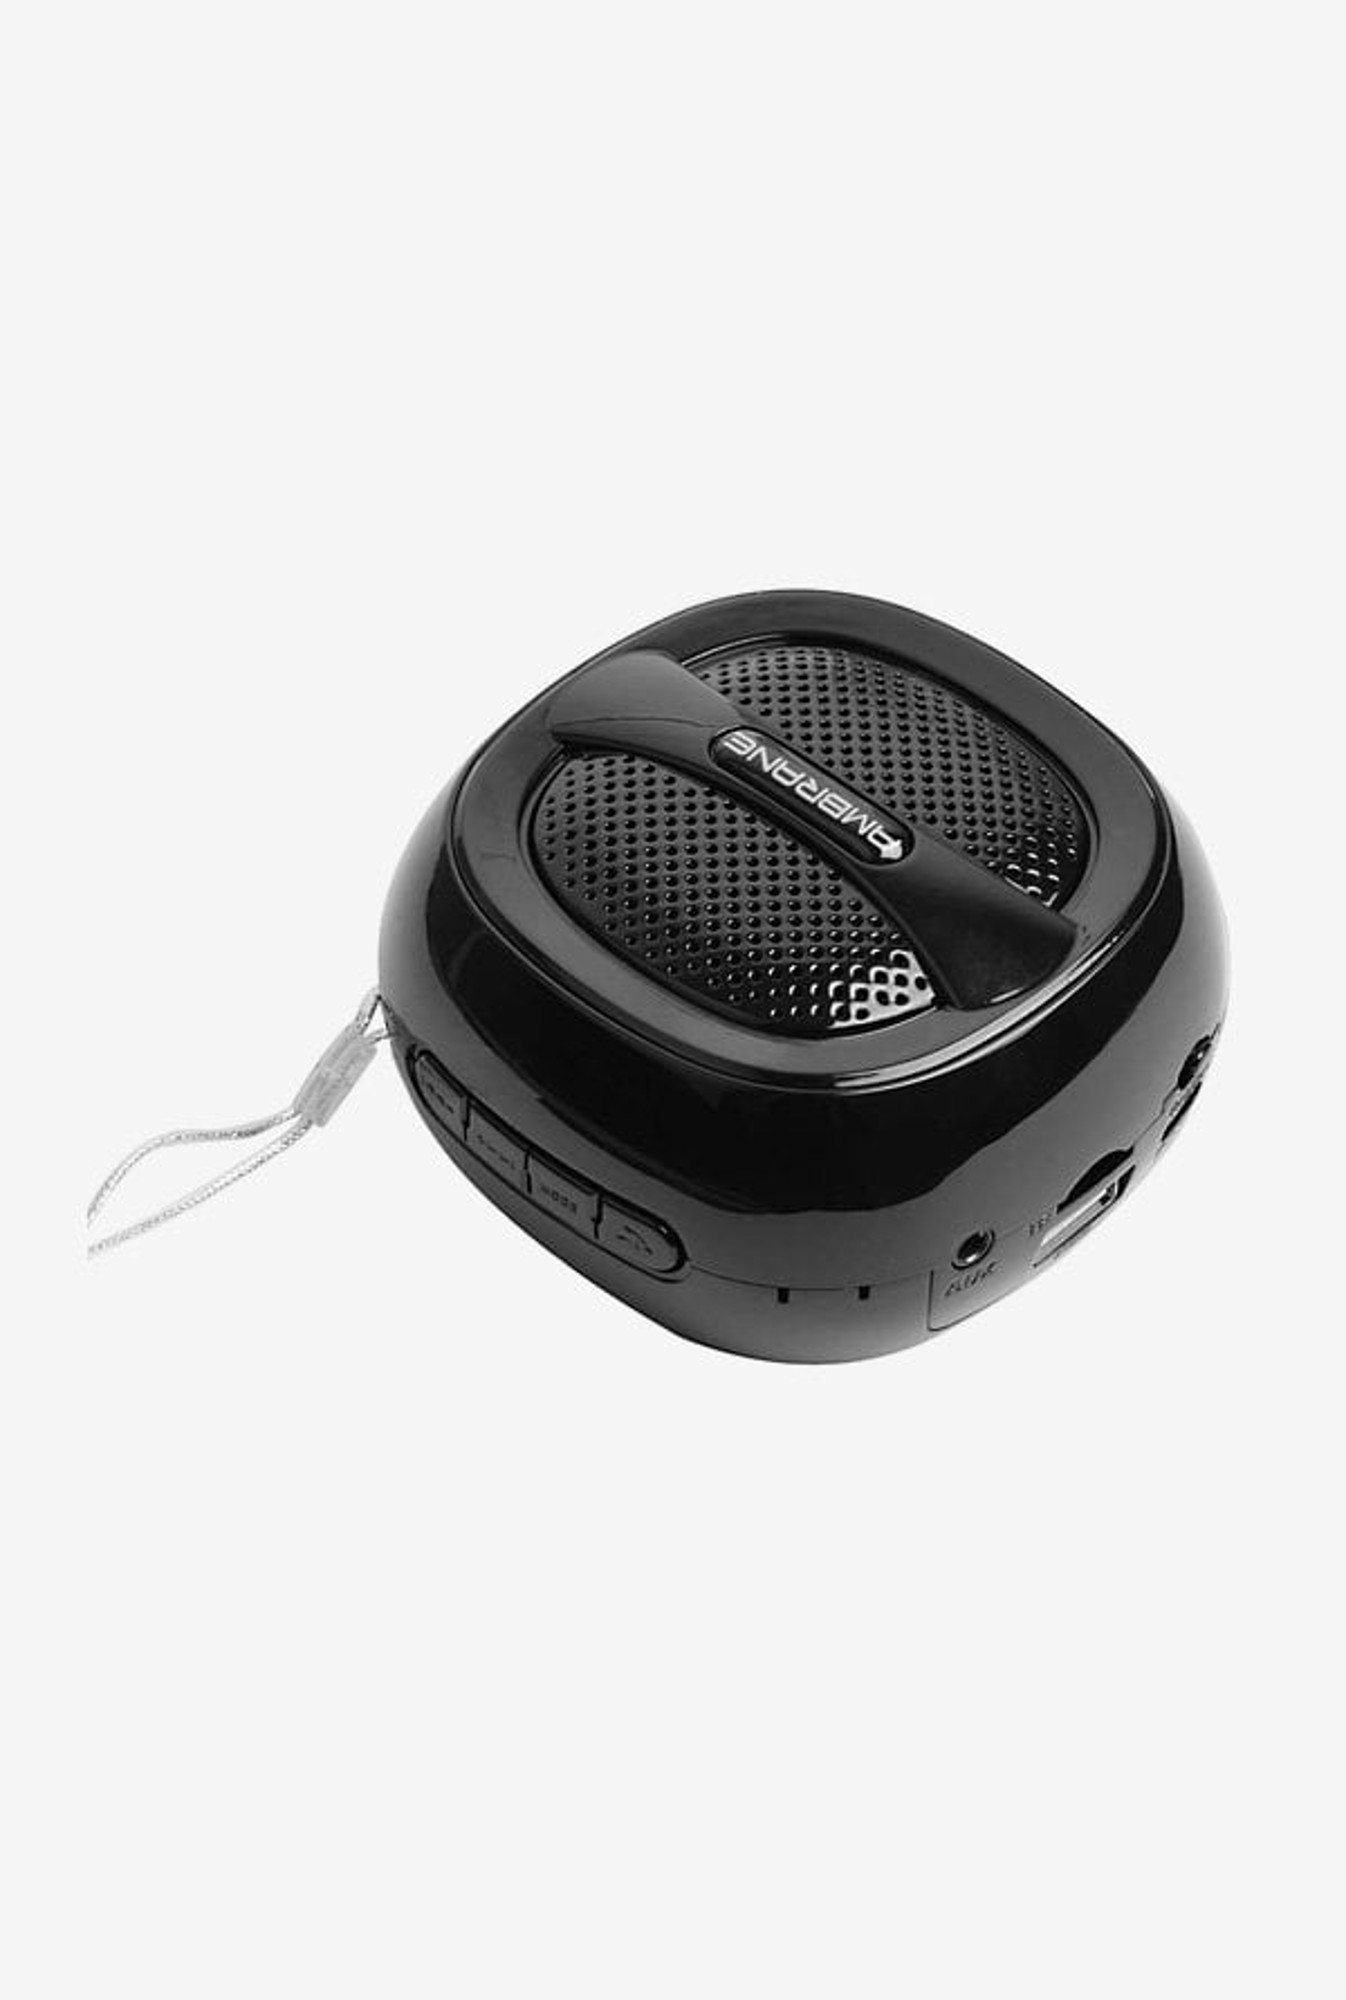 For 649/-(57% Off) Ambrane Portable Bluetooth Speaker BT-5000 Black @ Rs.649/- (57% off)MRP Rs. 1499 at TATA CLiQ